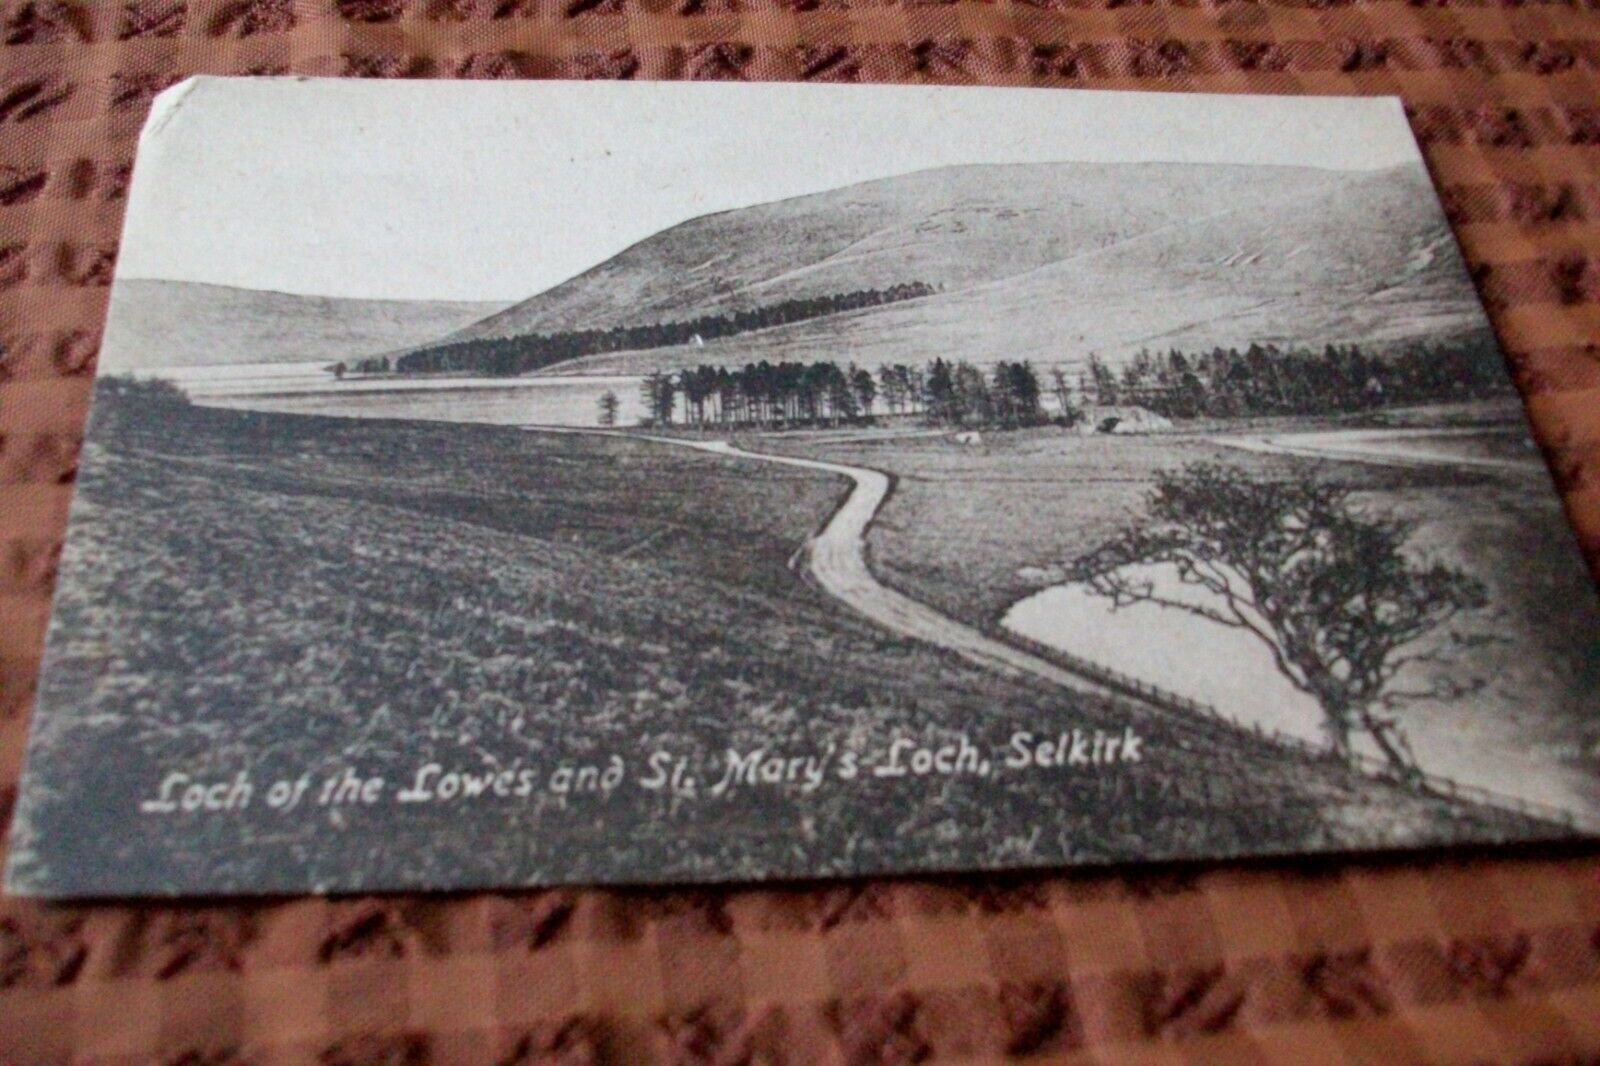 House Clearance - POSTCARD -- LOCH OF THE LOWES AND ST MARY'S LOCH, SELKIRK